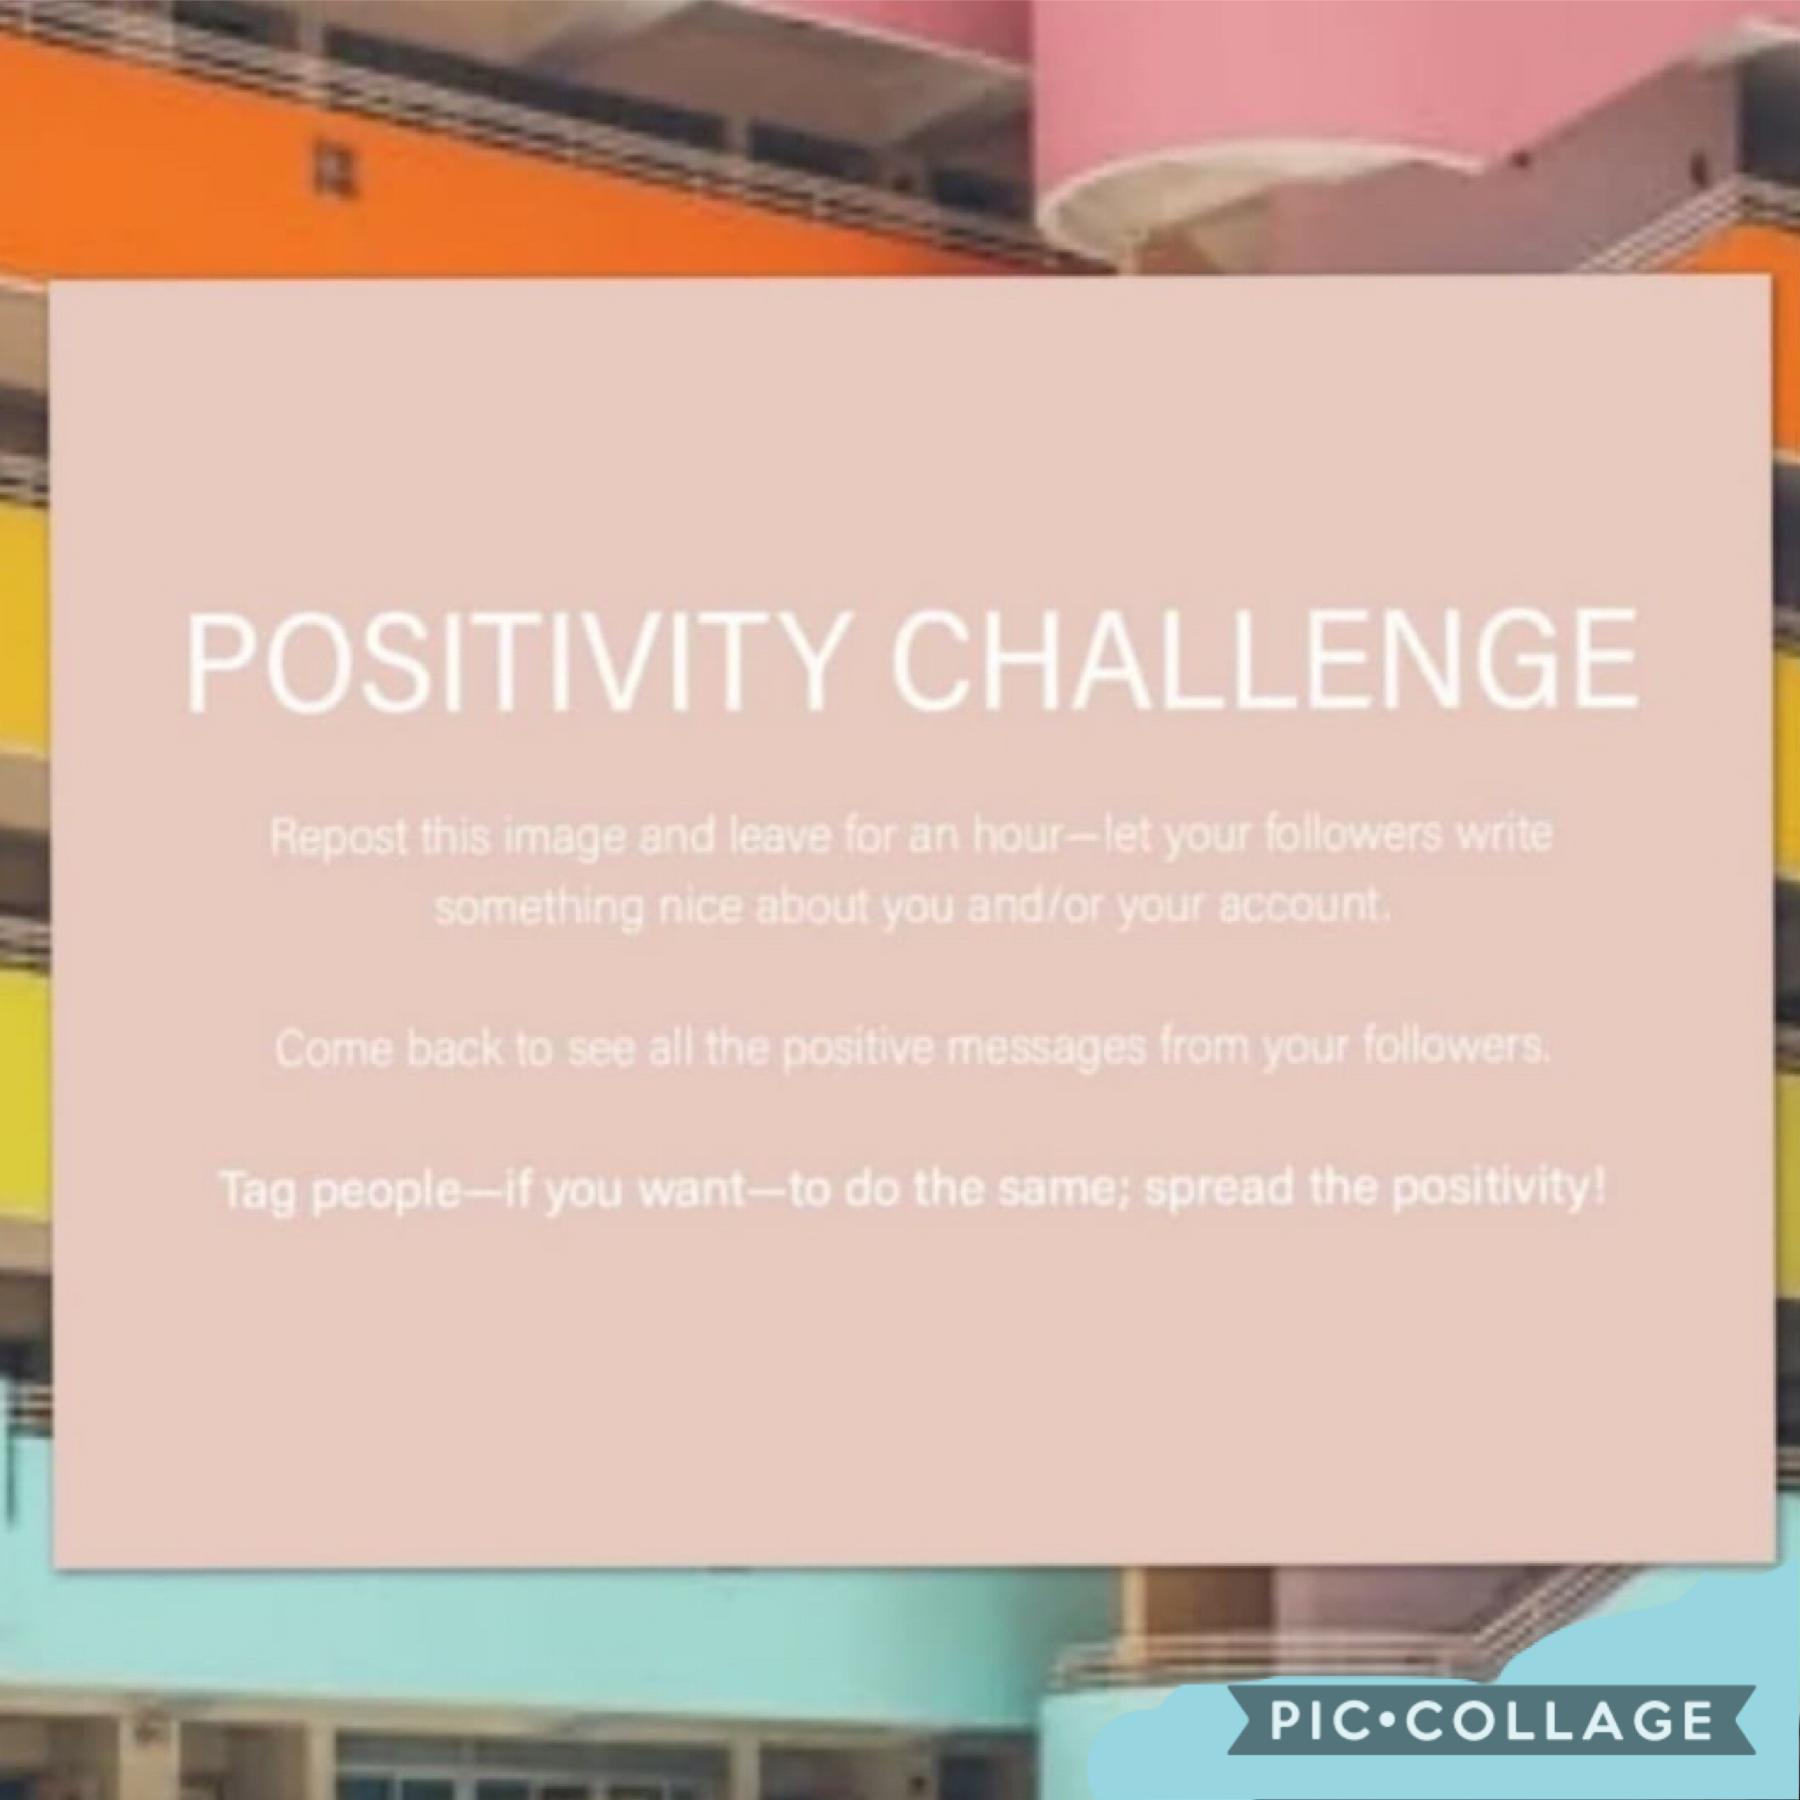 Tap!!
I saw this everywhere, so I thought I’d post my own!! This is such a great idea to spread love and kindness during corona time ;) have a wonderful day and thank you to all who comment!! ✨✨✨✨✨✨✨✨✨✨✨✨